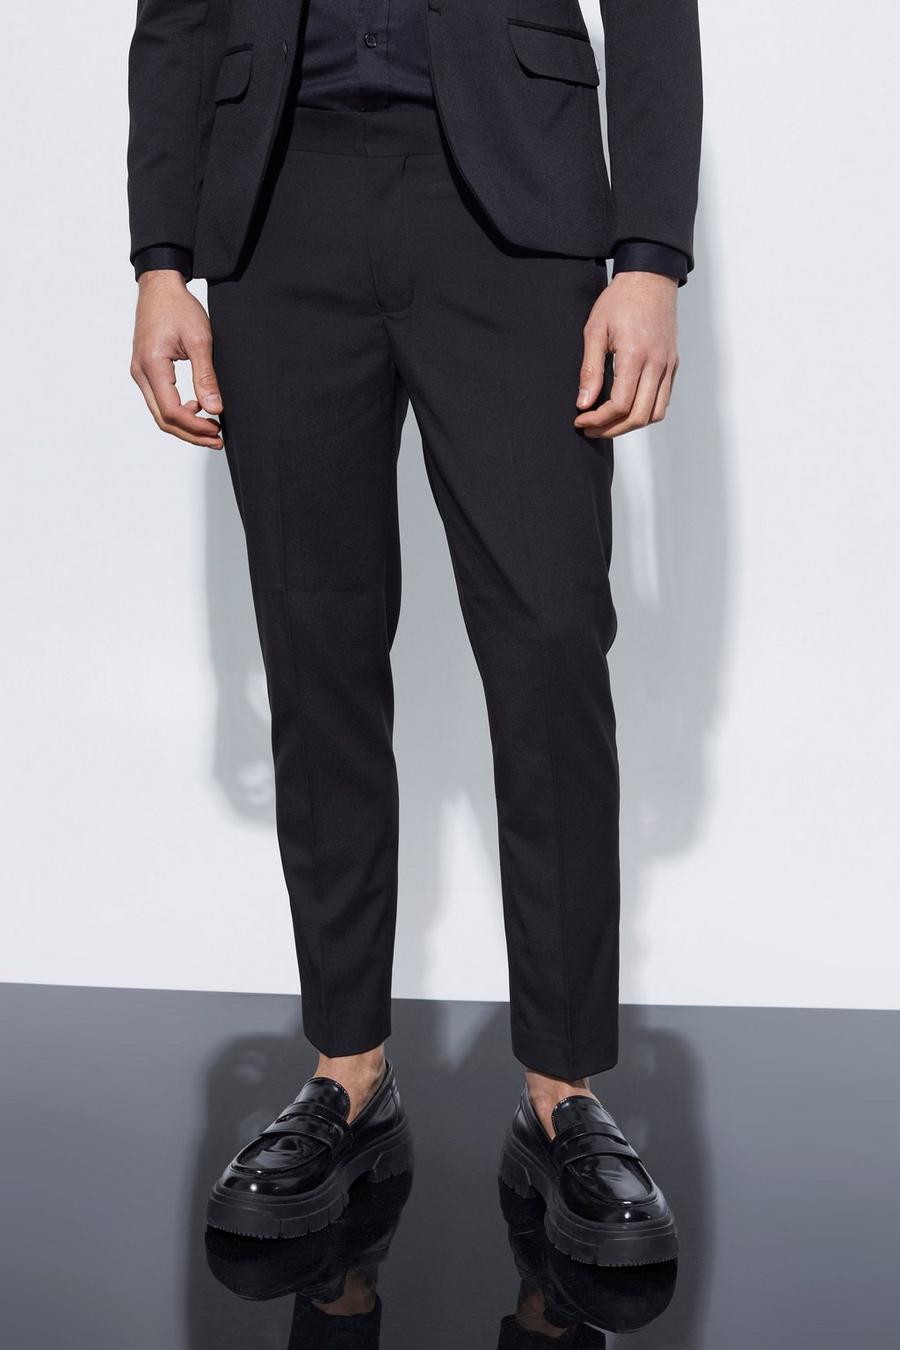 Black Skinny Cropped Suit ruffled Trousers